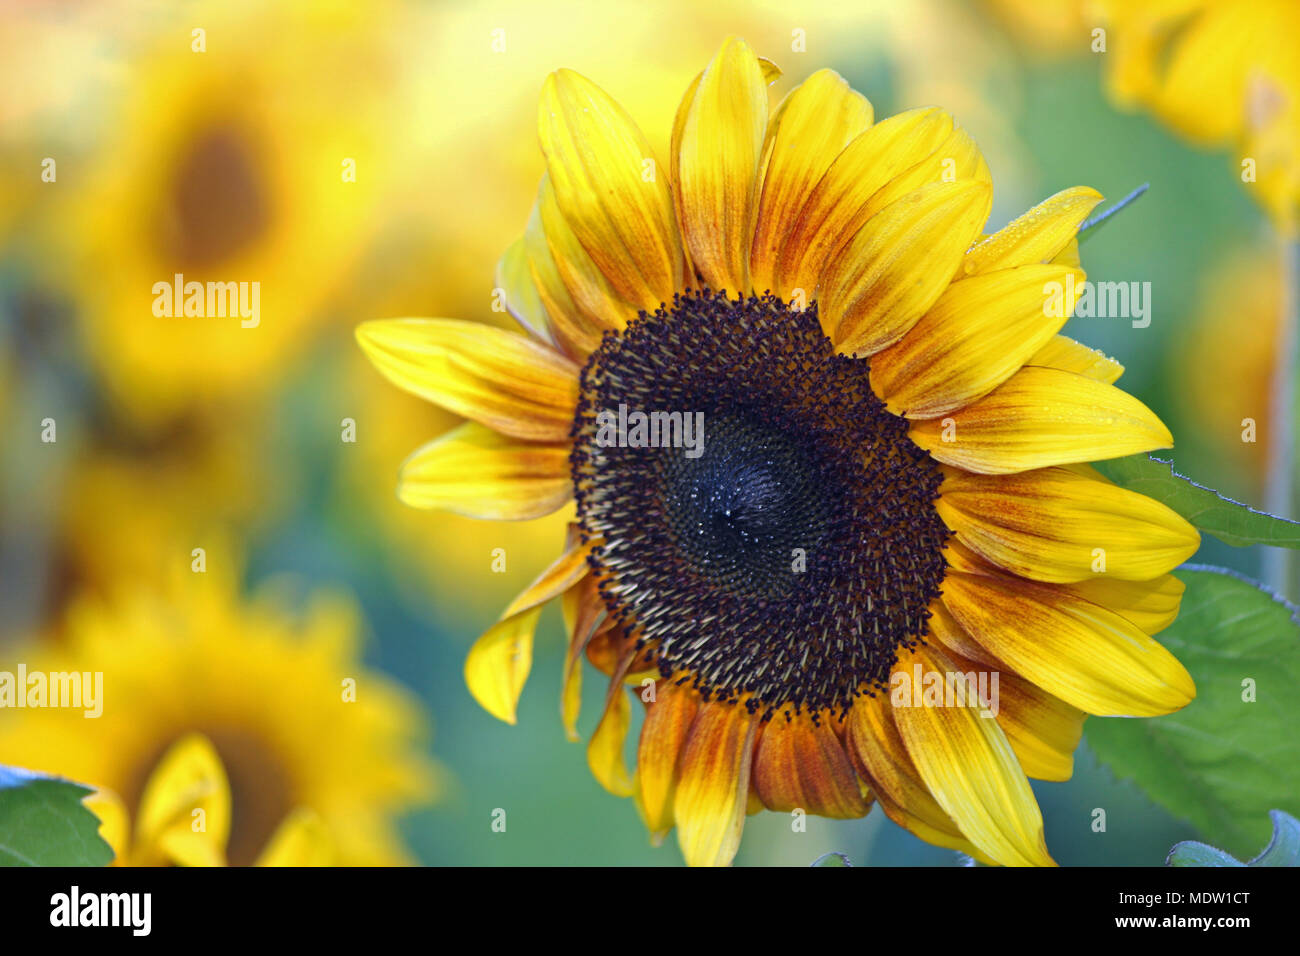 A closeup of a sunflower in a field of sunflowers in Fall Stock Photo